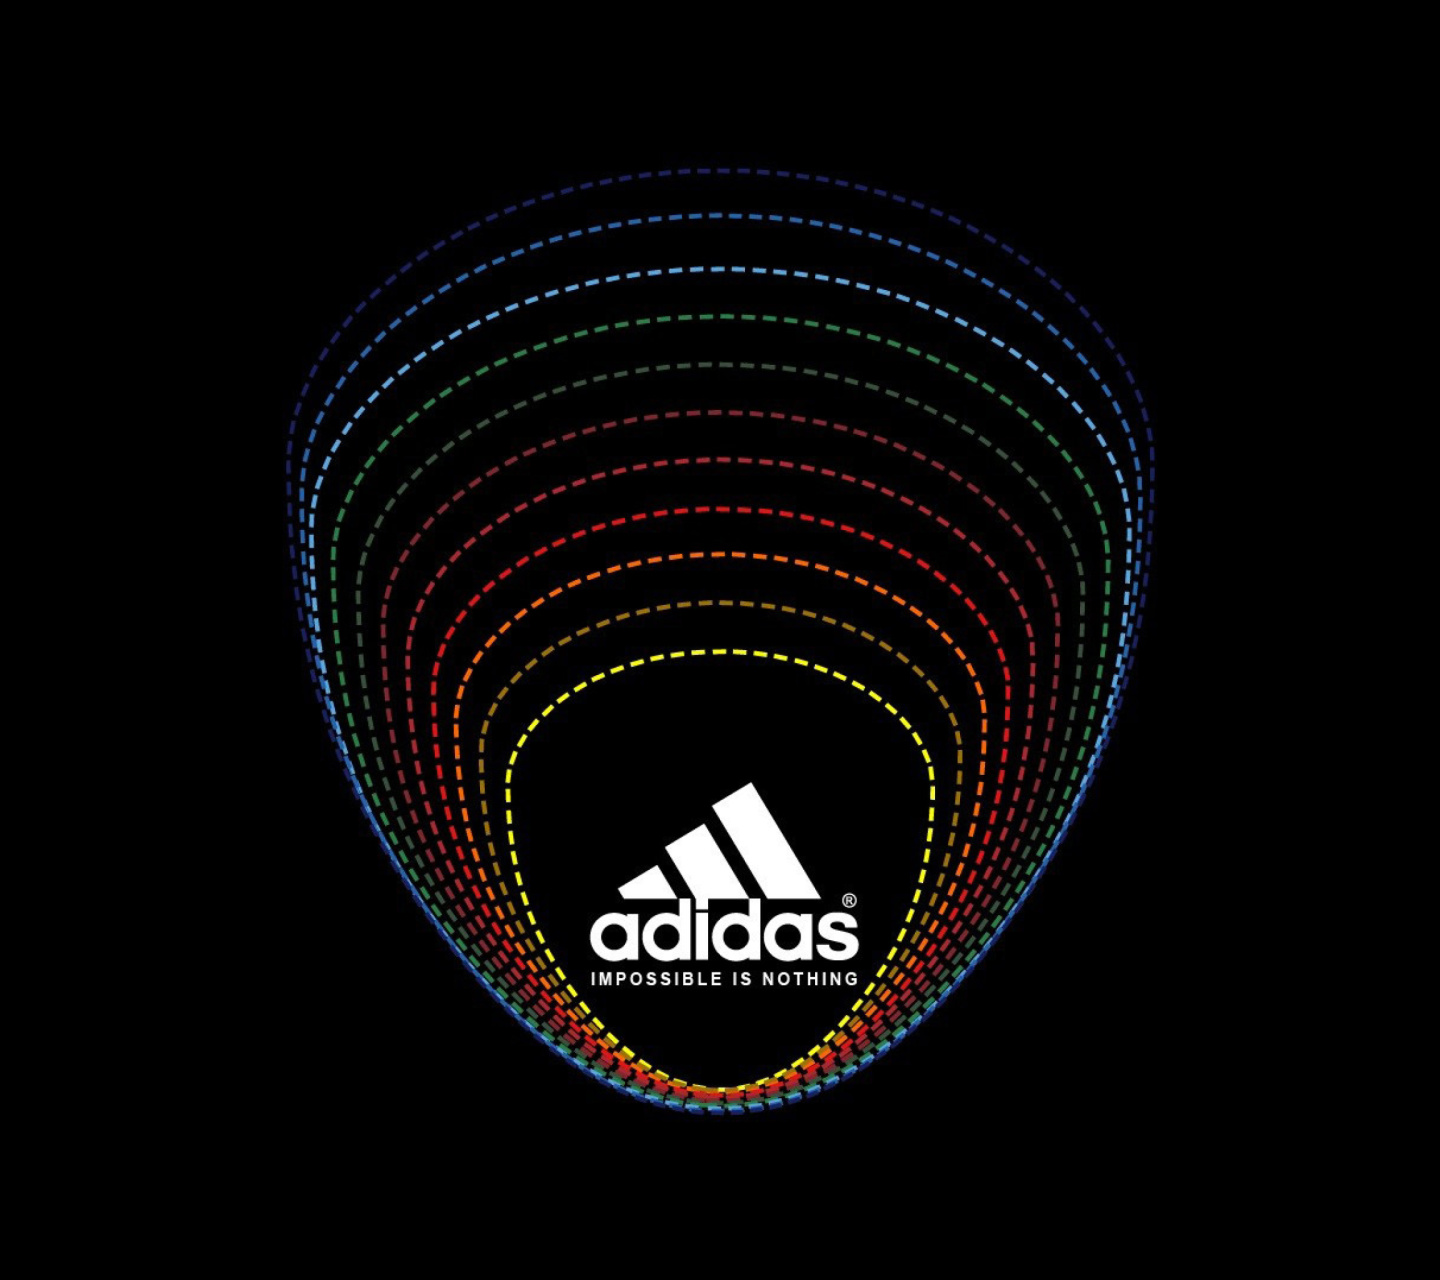 Adidas Tagline, Impossible is Nothing wallpaper 1440x1280